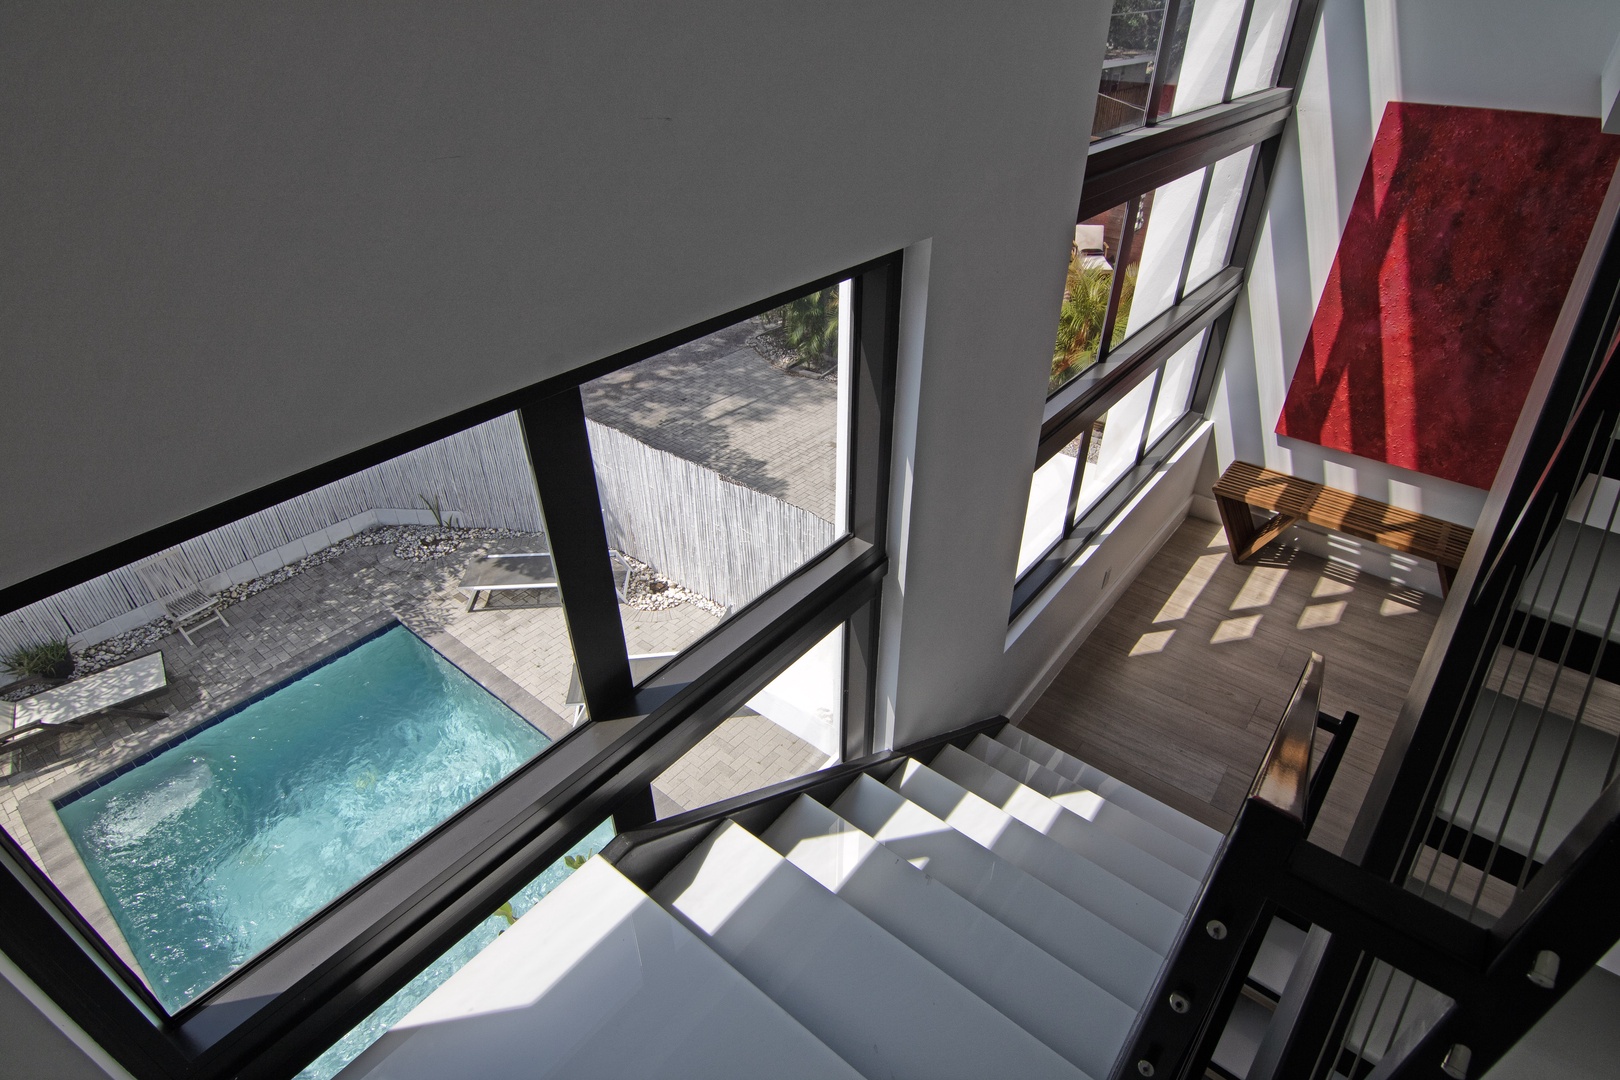 View of Private Pool from Interior Staircase